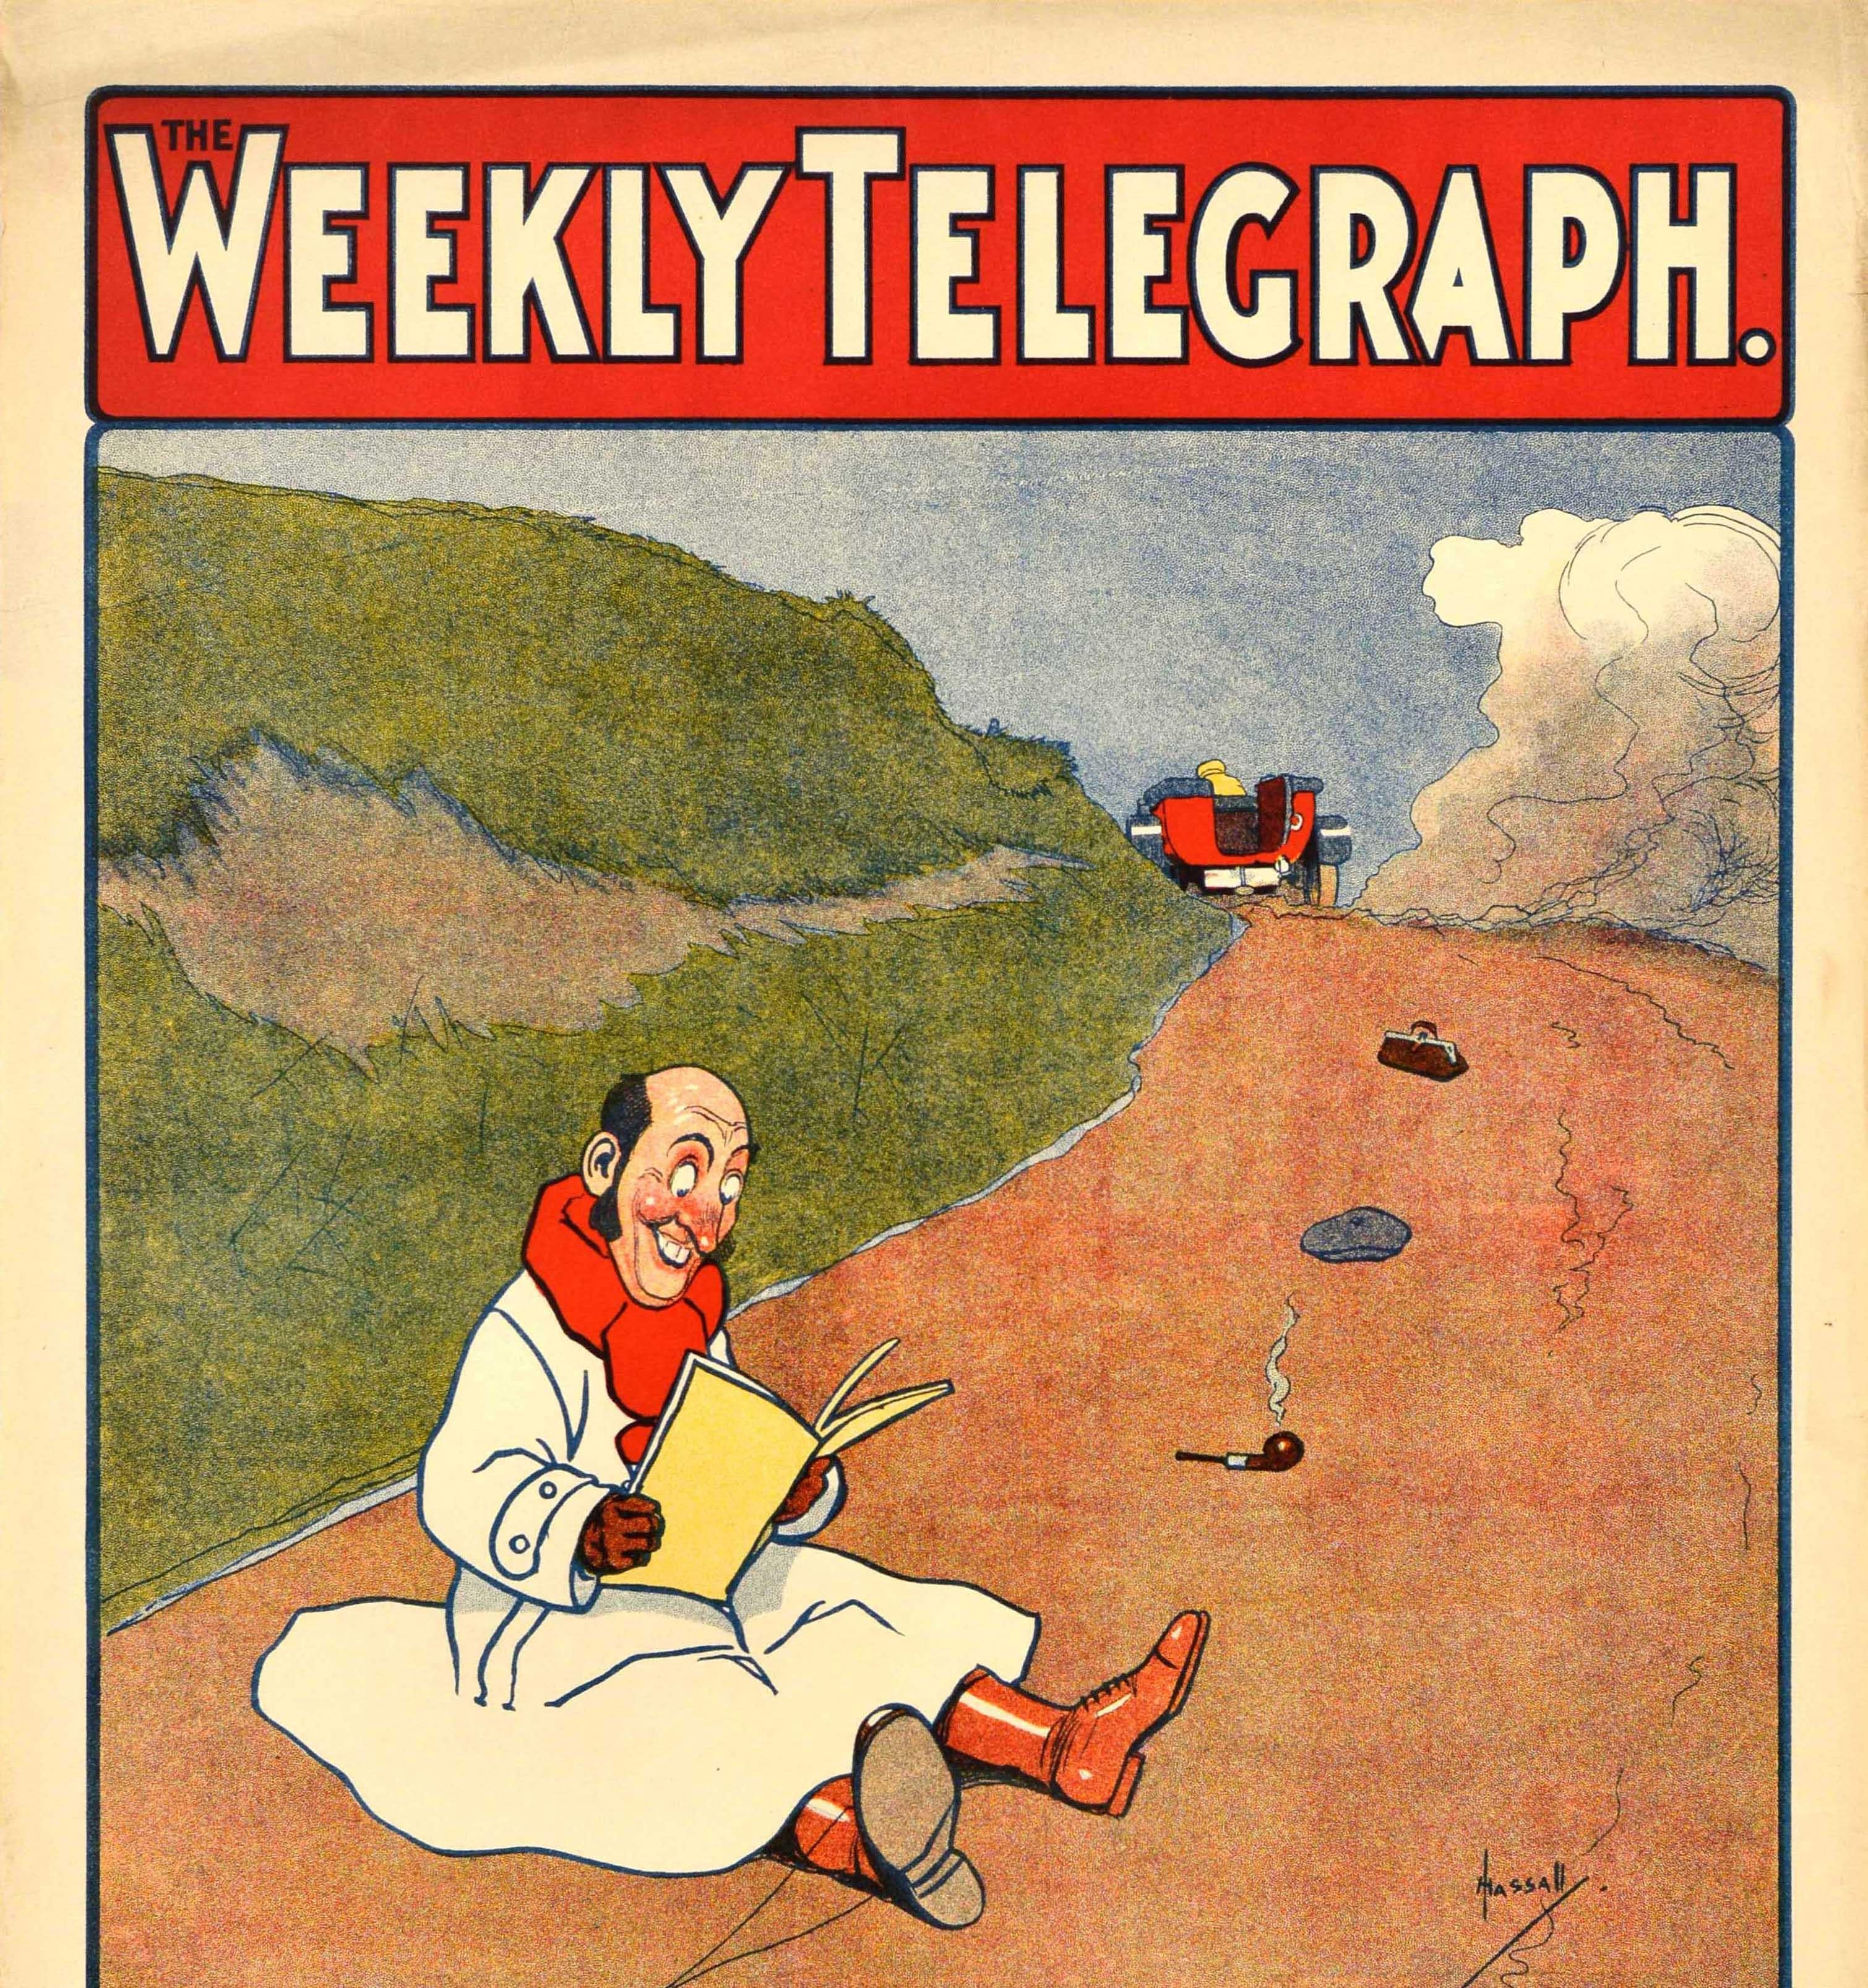 Original Antique Newspaper Advertising Poster The Weekly Telegraph On The Road - Beige Print by John Hassall